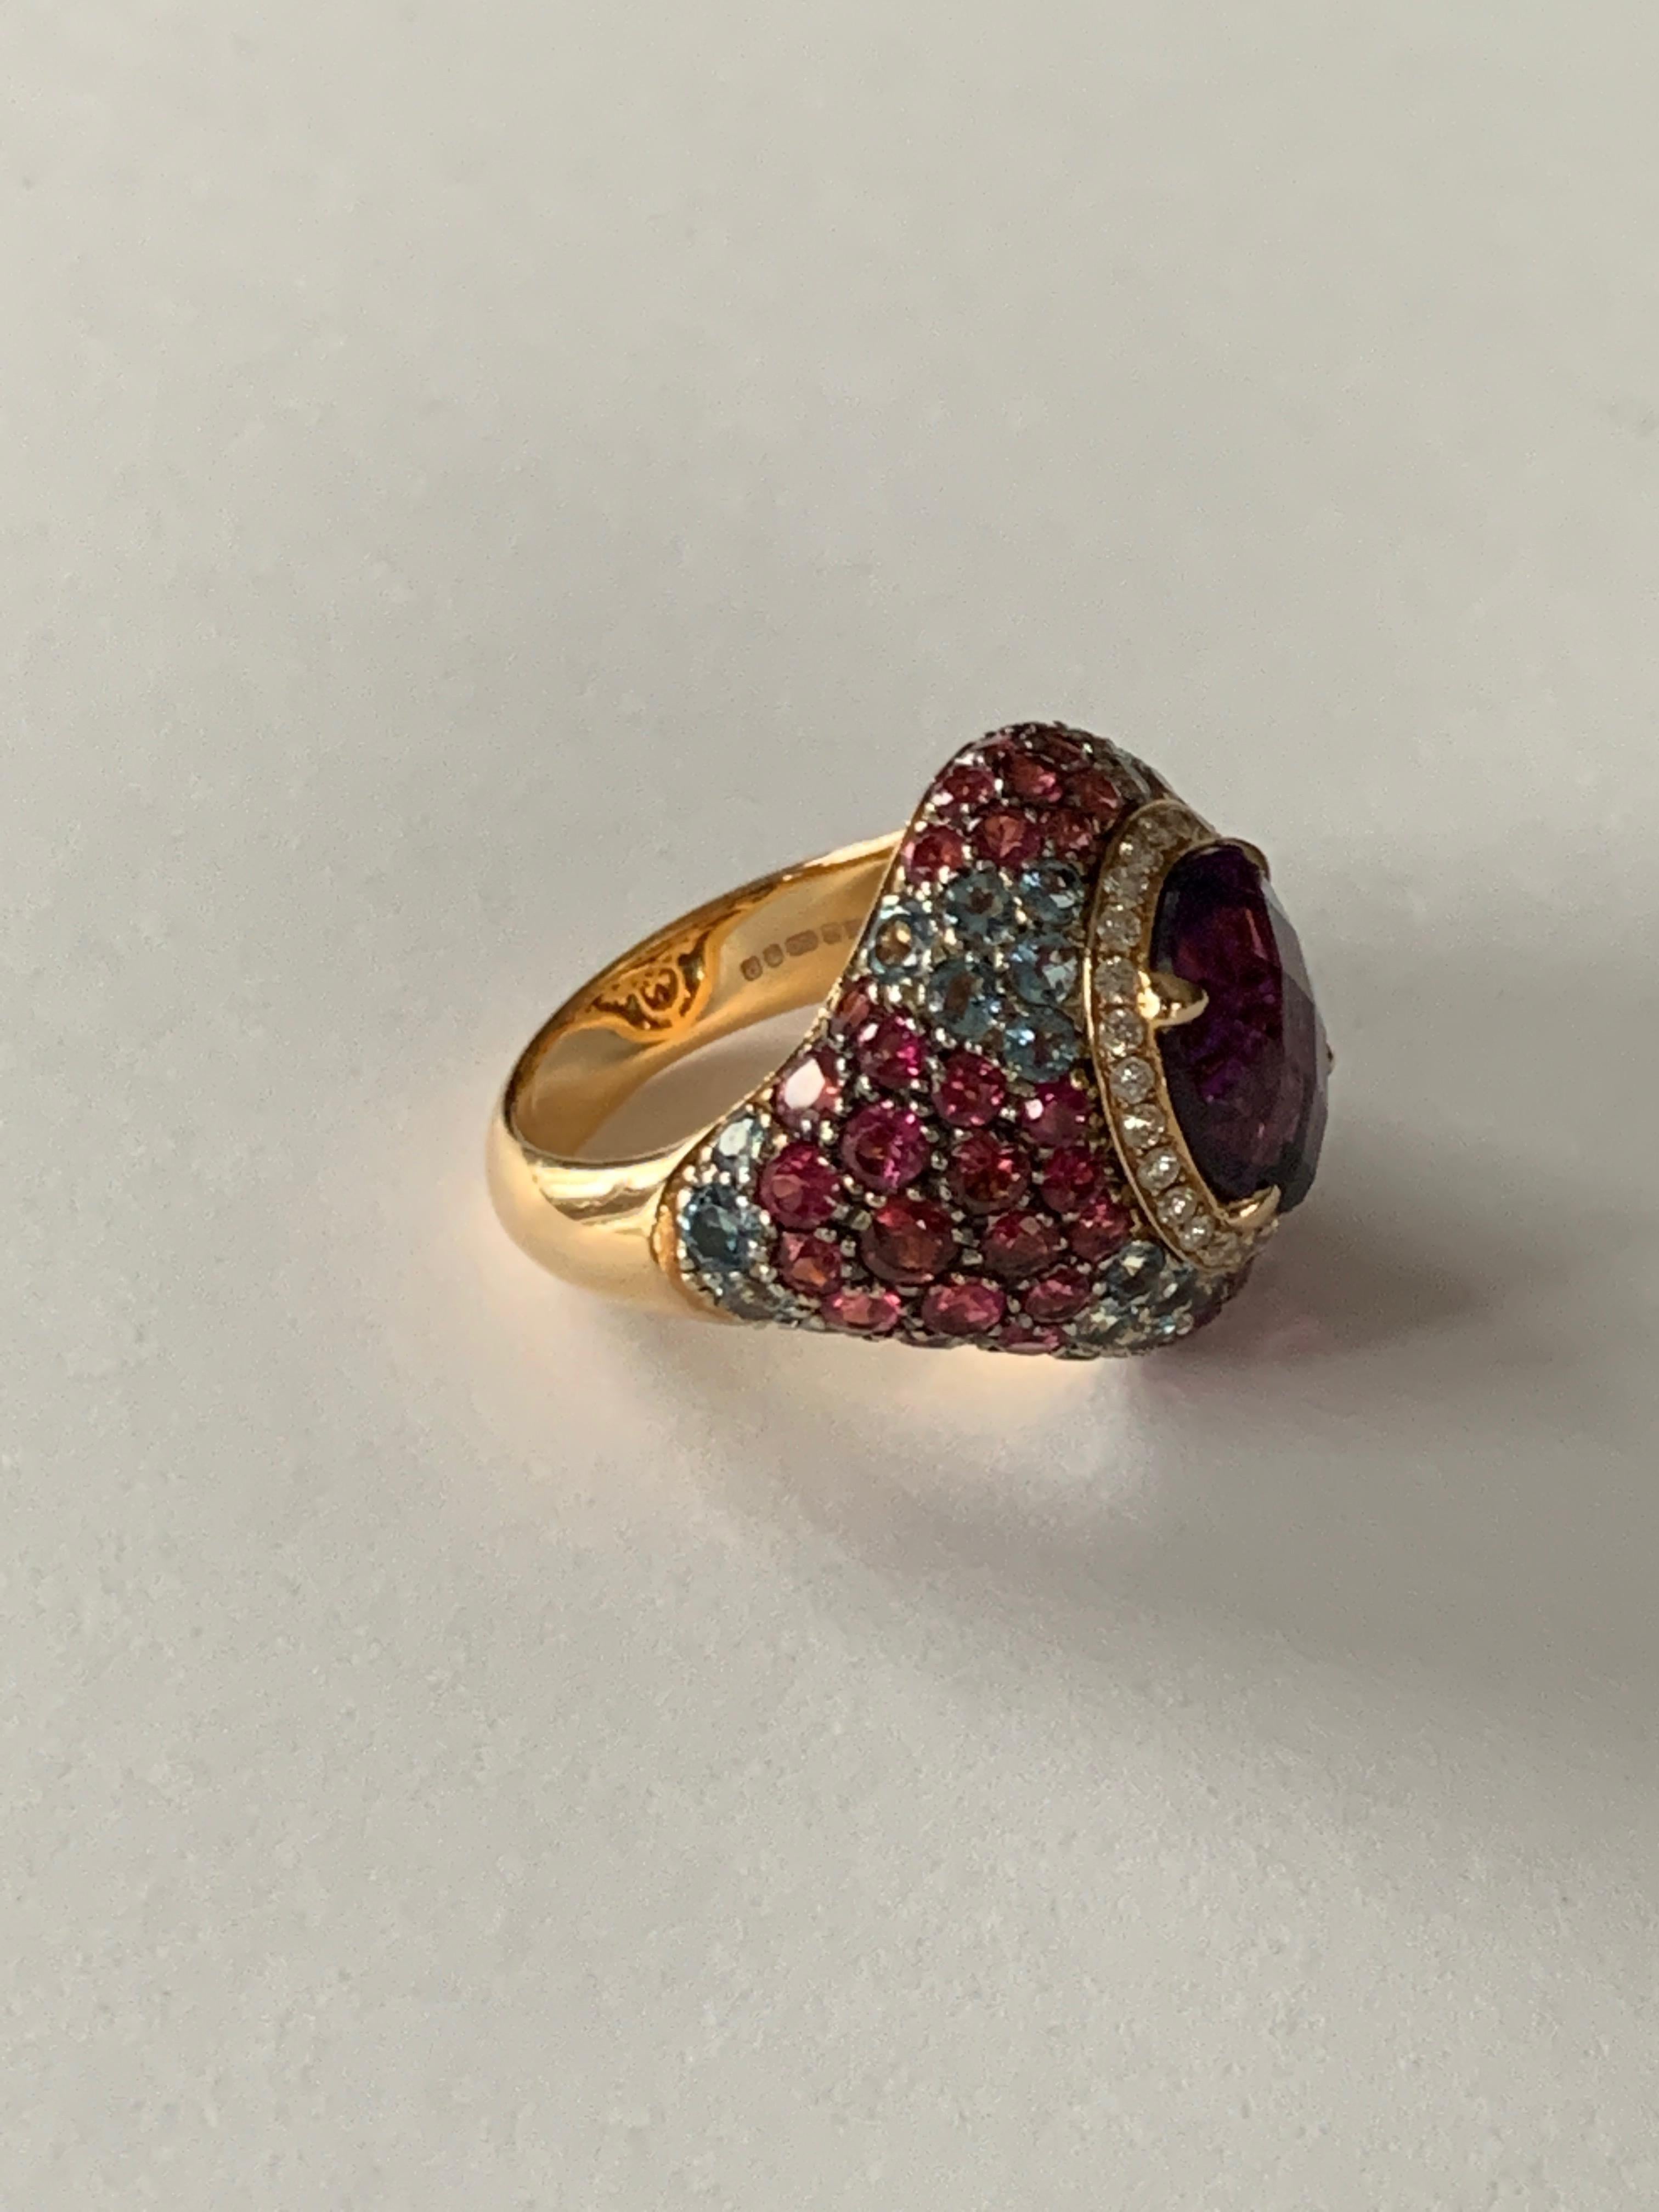 Contemporary 18 Karat Rose Gold Amethyst Cocktail Ring with Rubellite, Aquamarine and Diamond